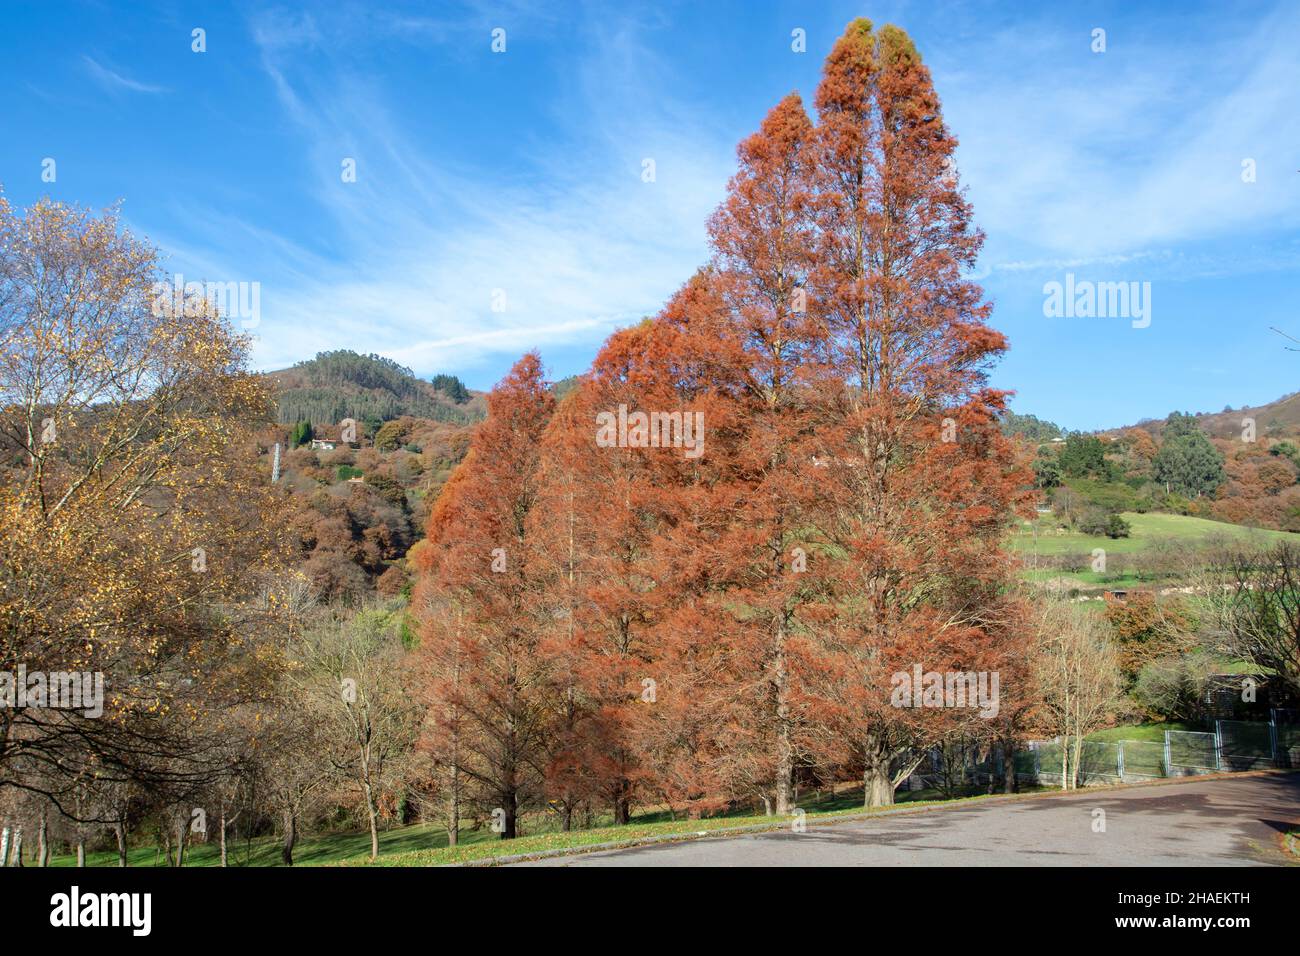 Metasequoia glyptostroboides or dawn redwood trees with autumn colored red leaves in the Purificacion Tomas park in Oviedo, Spain Stock Photo